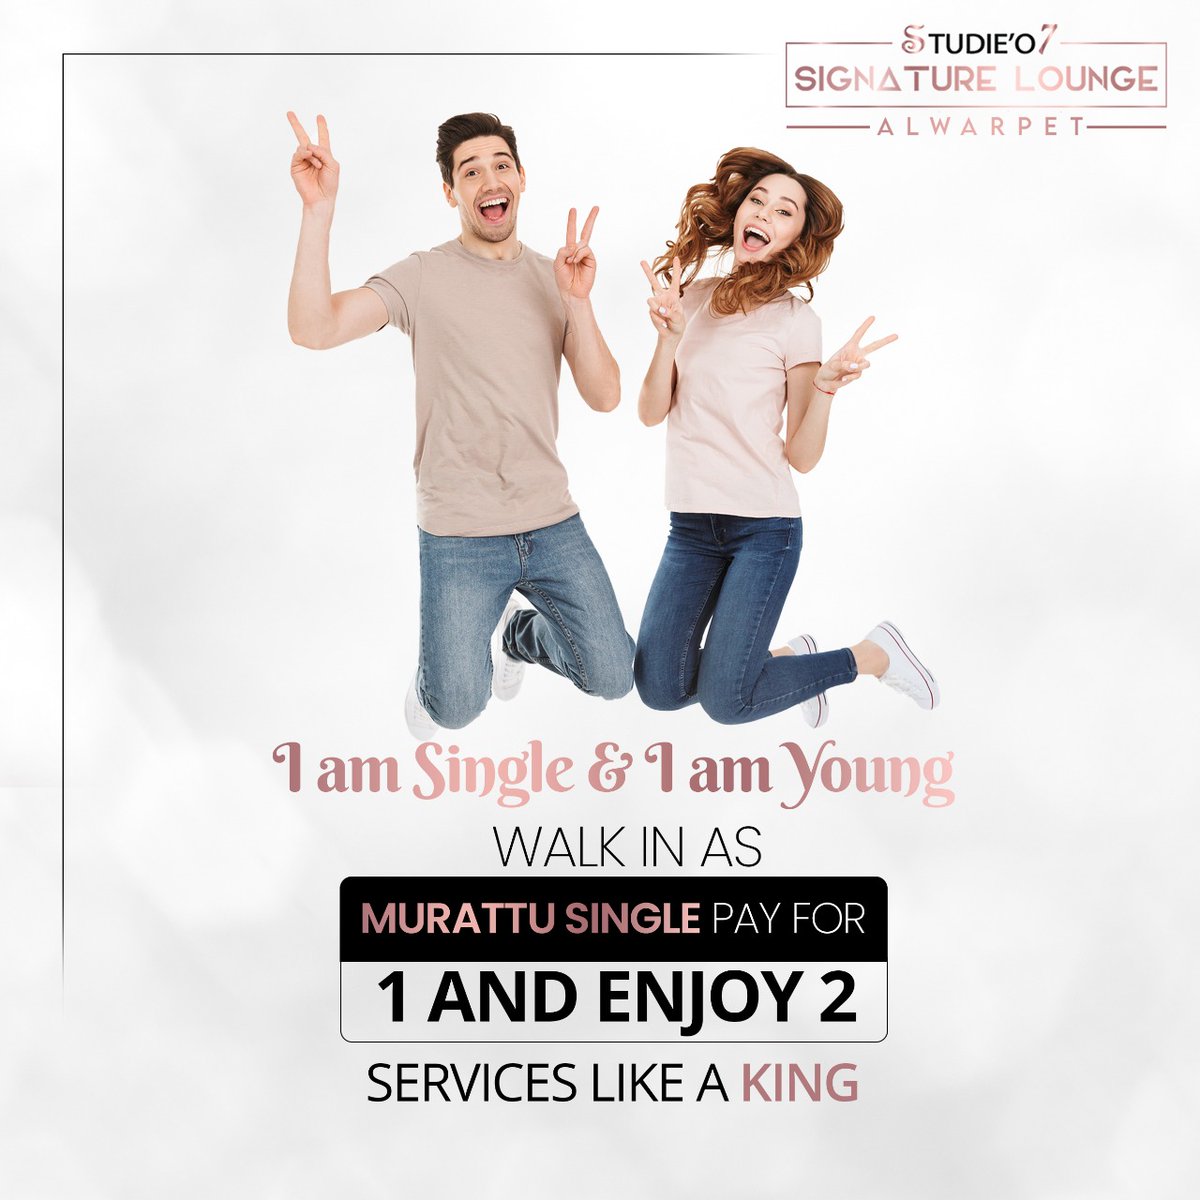 Dont worry if your a murattu single, we are here to make you feel better and proud to be single. Step in and enjoy two services paying for only one.
#singleoffer #offersforyou #singlesandreadytomingle #offfersforsingles
.
Call us @ Chennai - 04423455080 to book appointments.